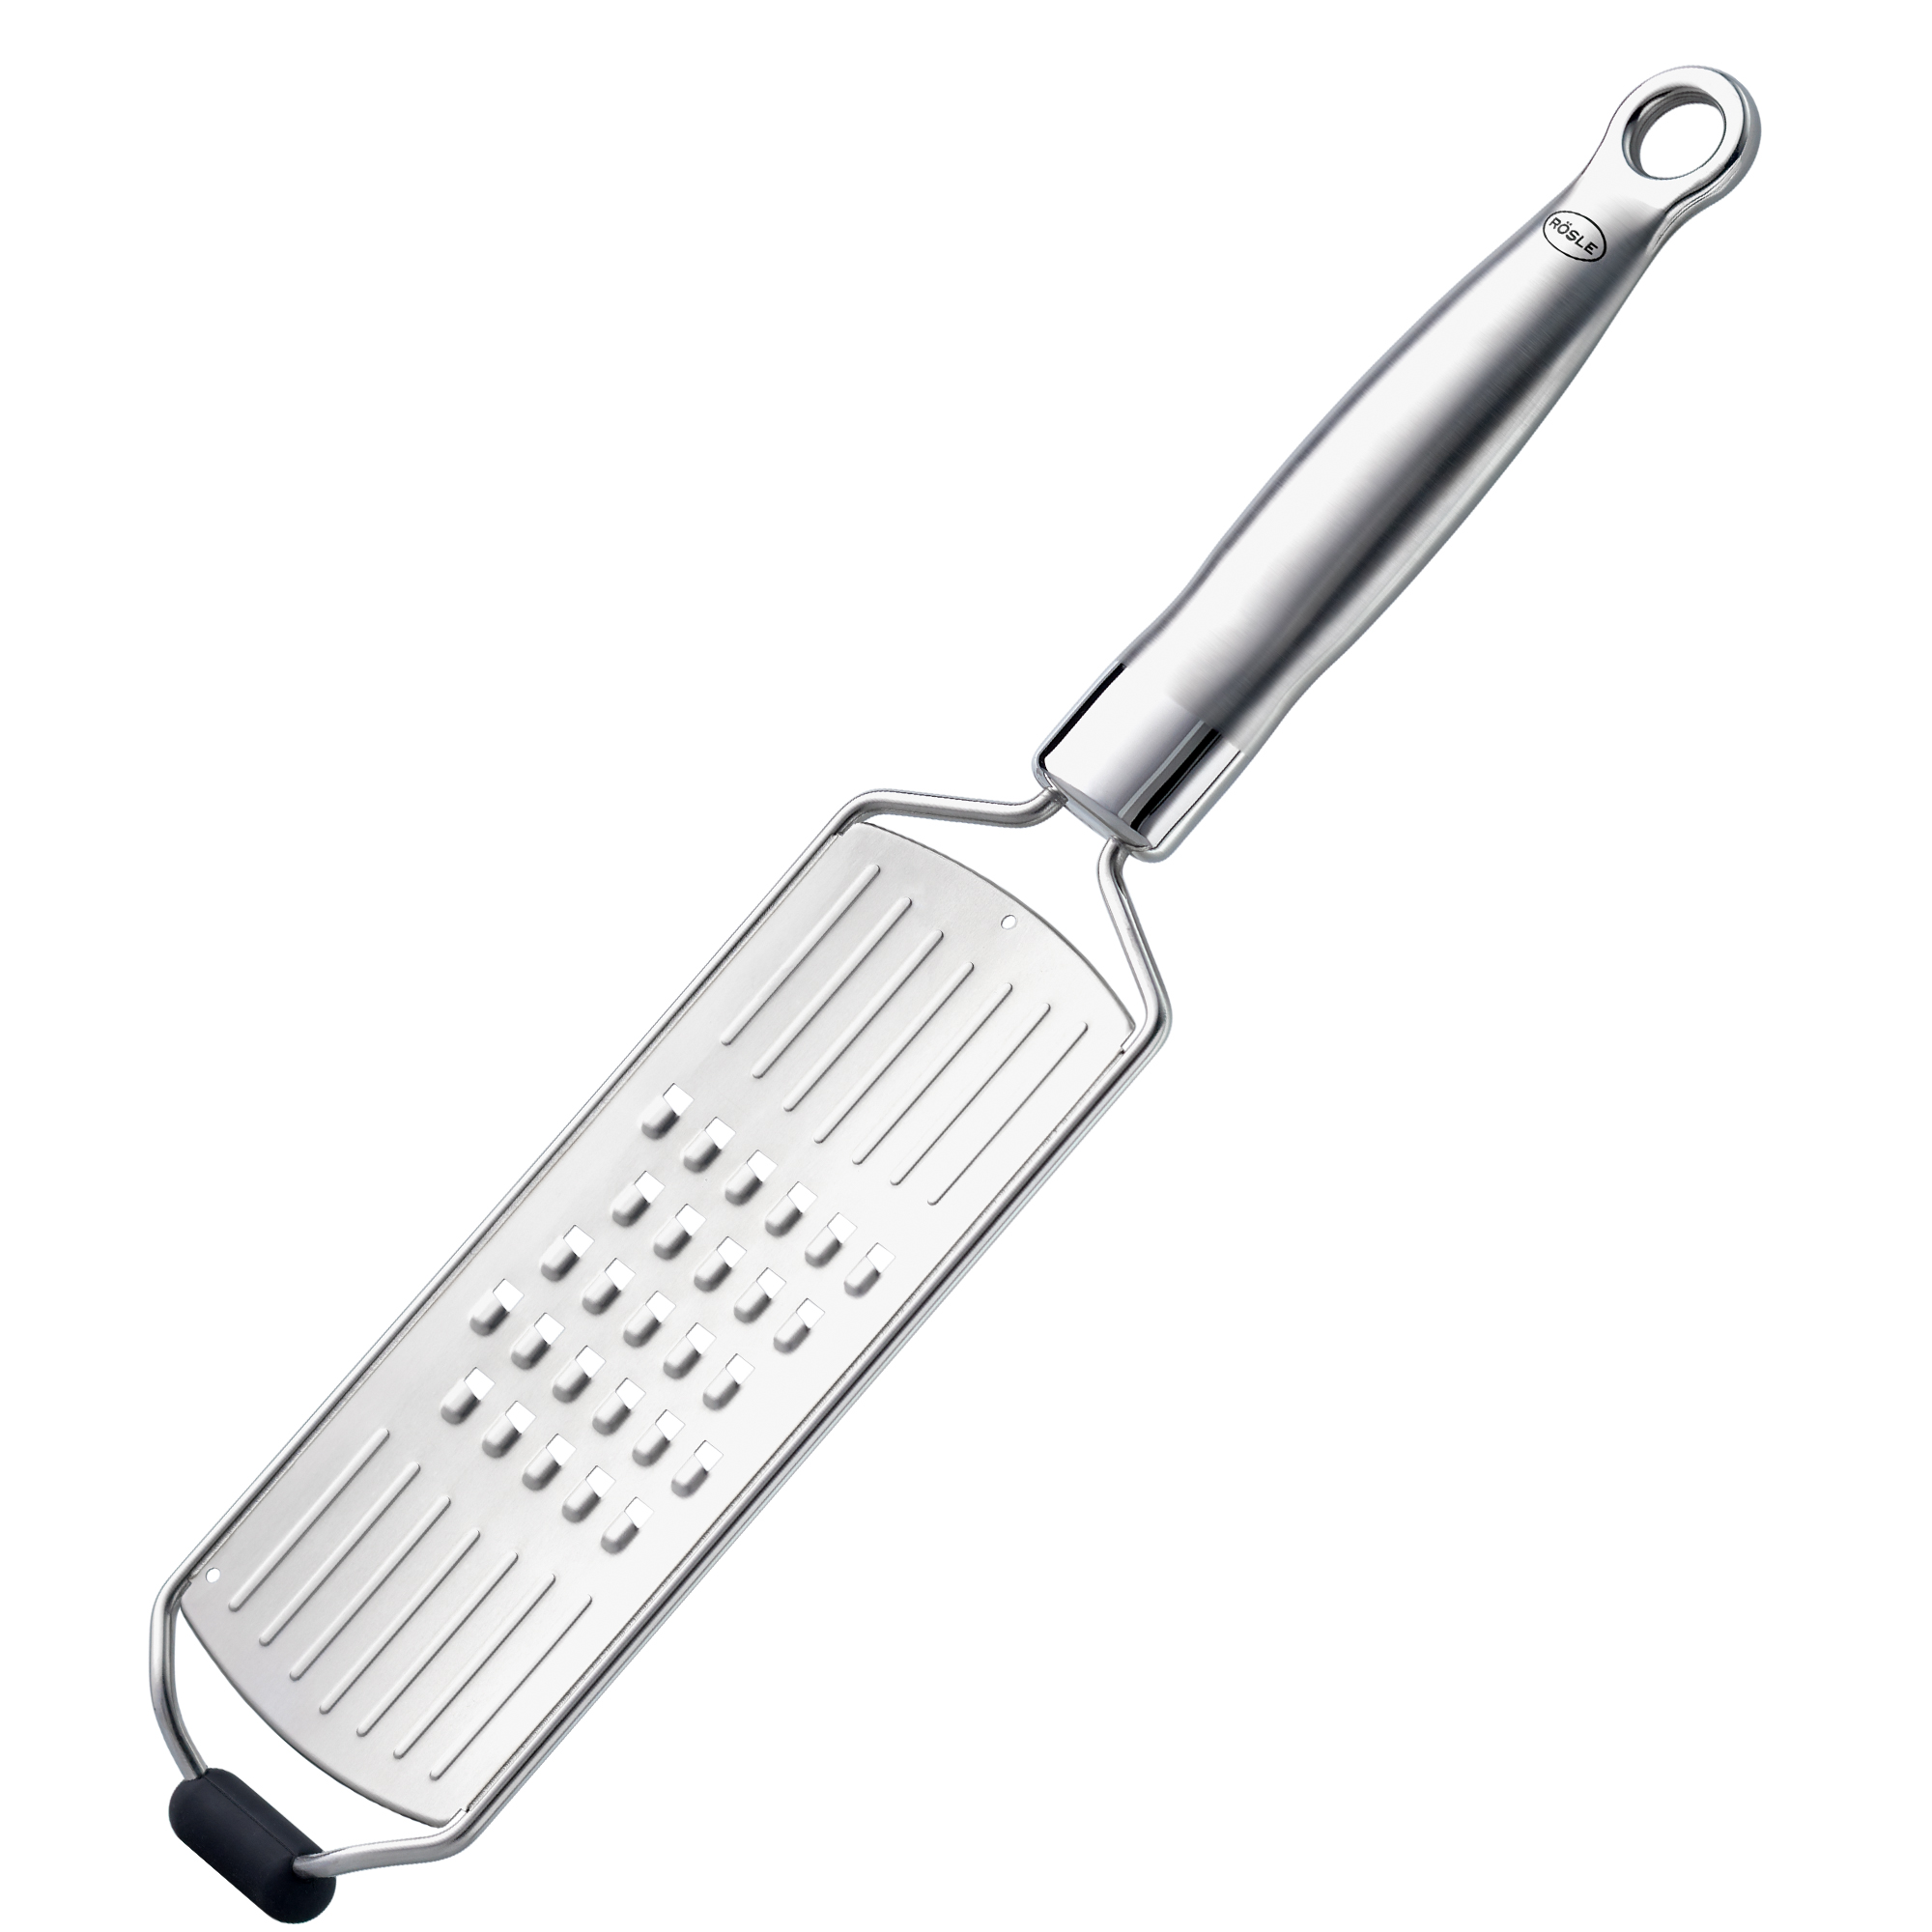 STAINLESS STEEL CHEESE GRATER MILL - PURCHASE OF KITCHEN UTENSILS